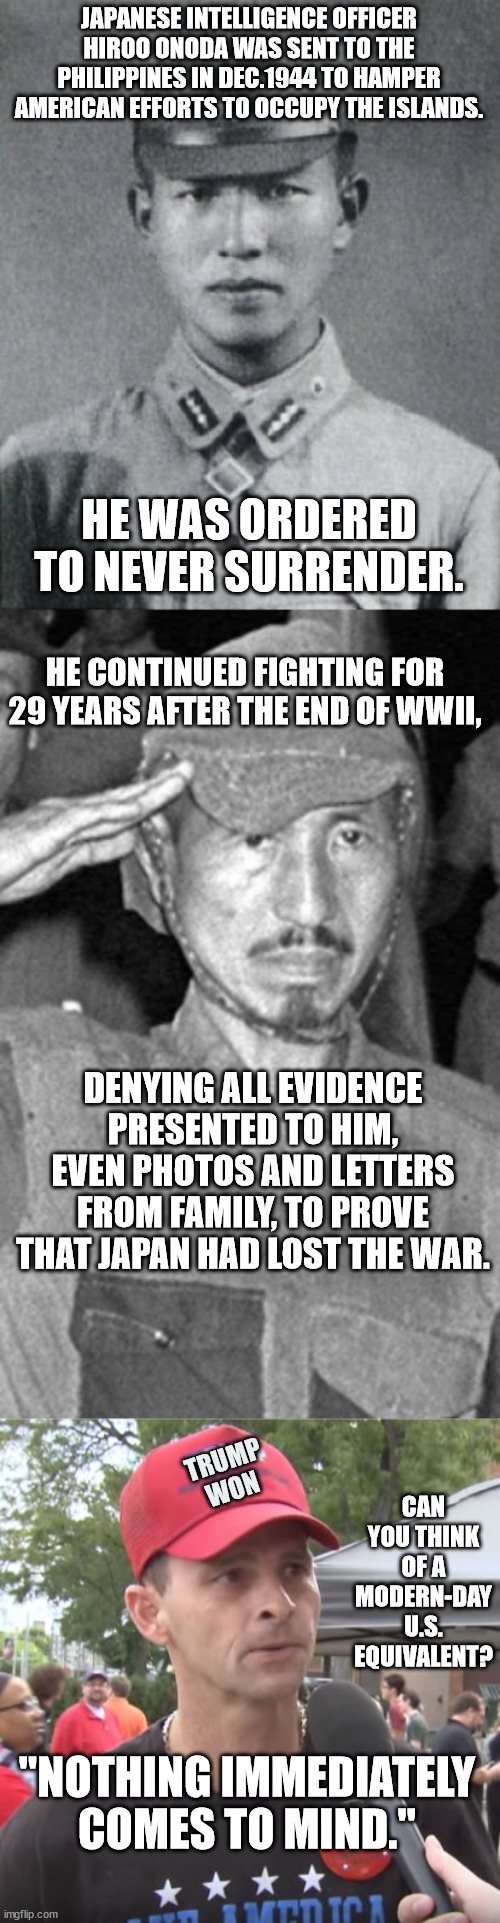 "Denial? Ain't that a river in Egypt?" | JAPANESE INTELLIGENCE OFFICER HIROO ONODA WAS SENT TO THE PHILIPPINES IN DEC.1944 TO HAMPER AMERICAN EFFORTS TO OCCUPY THE ISLANDS. HE WAS ORDERED TO NEVER SURRENDER. HE CONTINUED FIGHTING FOR 29 YEARS AFTER THE END OF WWII, DENYING ALL EVIDENCE PRESENTED TO HIM, EVEN PHOTOS AND LETTERS FROM FAMILY, TO PROVE THAT JAPAN HAD LOST THE WAR. TRUMP
WON; CAN YOU THINK OF A MODERN-DAY U.S. EQUIVALENT? "NOTHING IMMEDIATELY COMES TO MIND." | image tagged in maga can't handle the truth | made w/ Imgflip meme maker